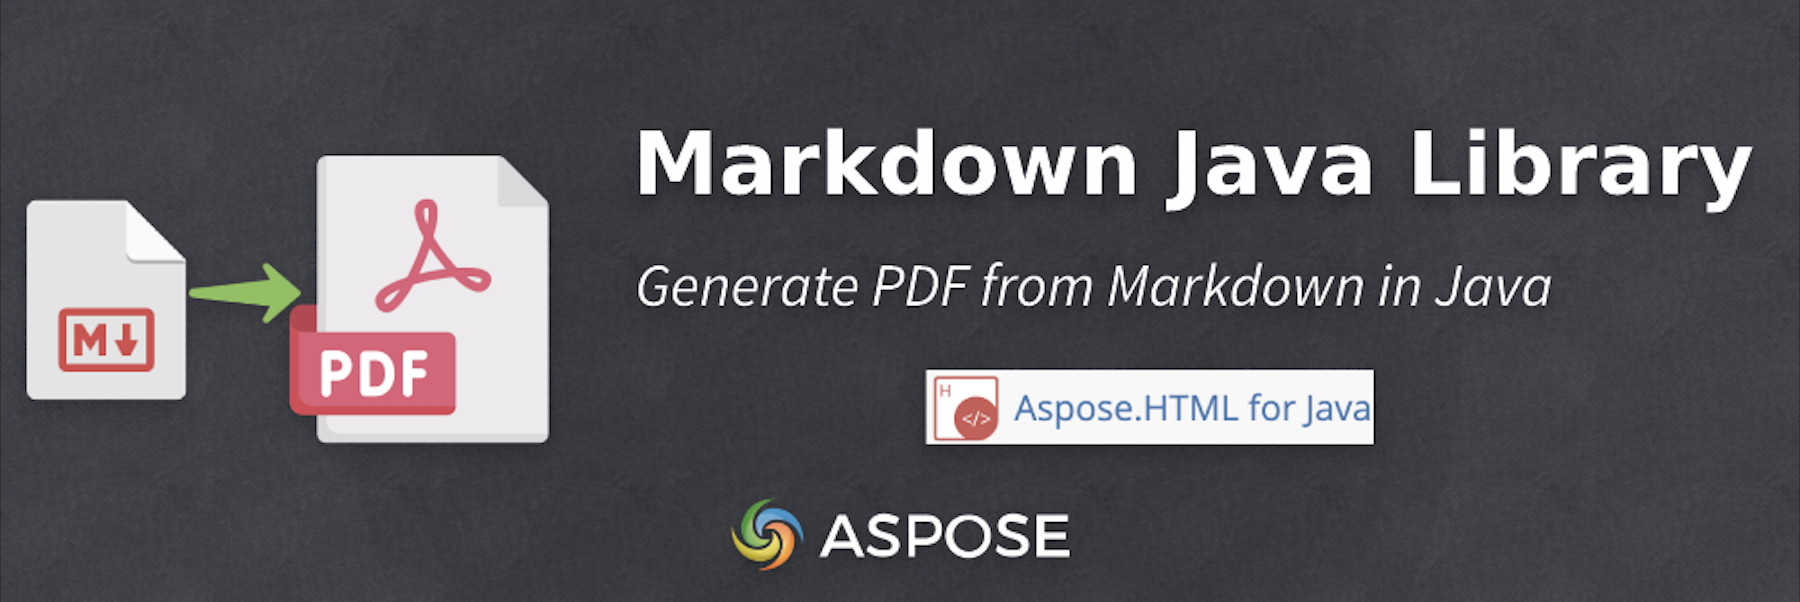 Generate PDF from Markdown in Java - Markdown to PDF